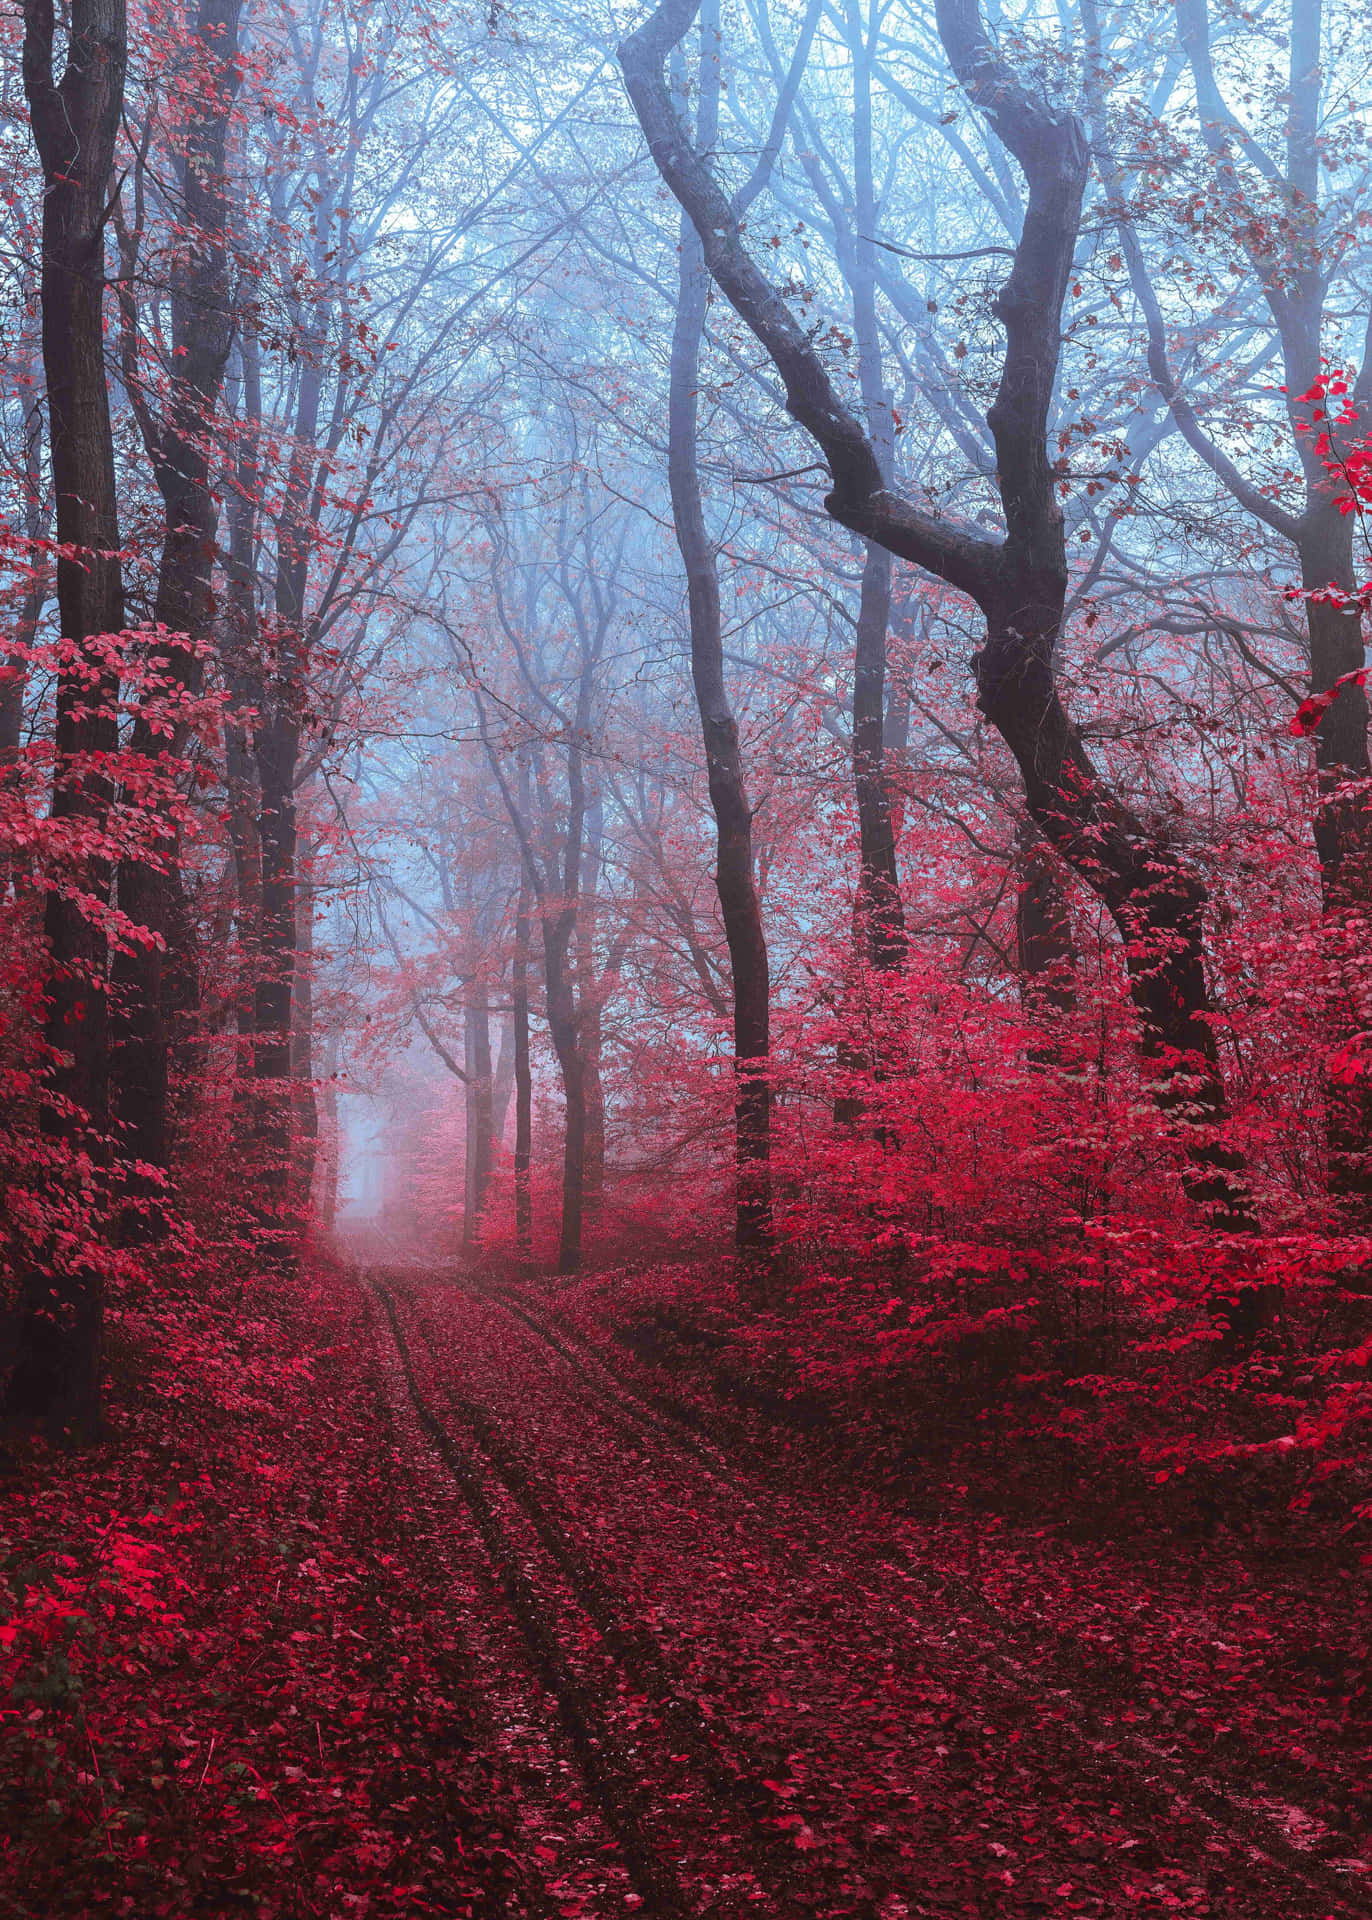 Caption: Enchanting Fall Mist in a Forest Wallpaper